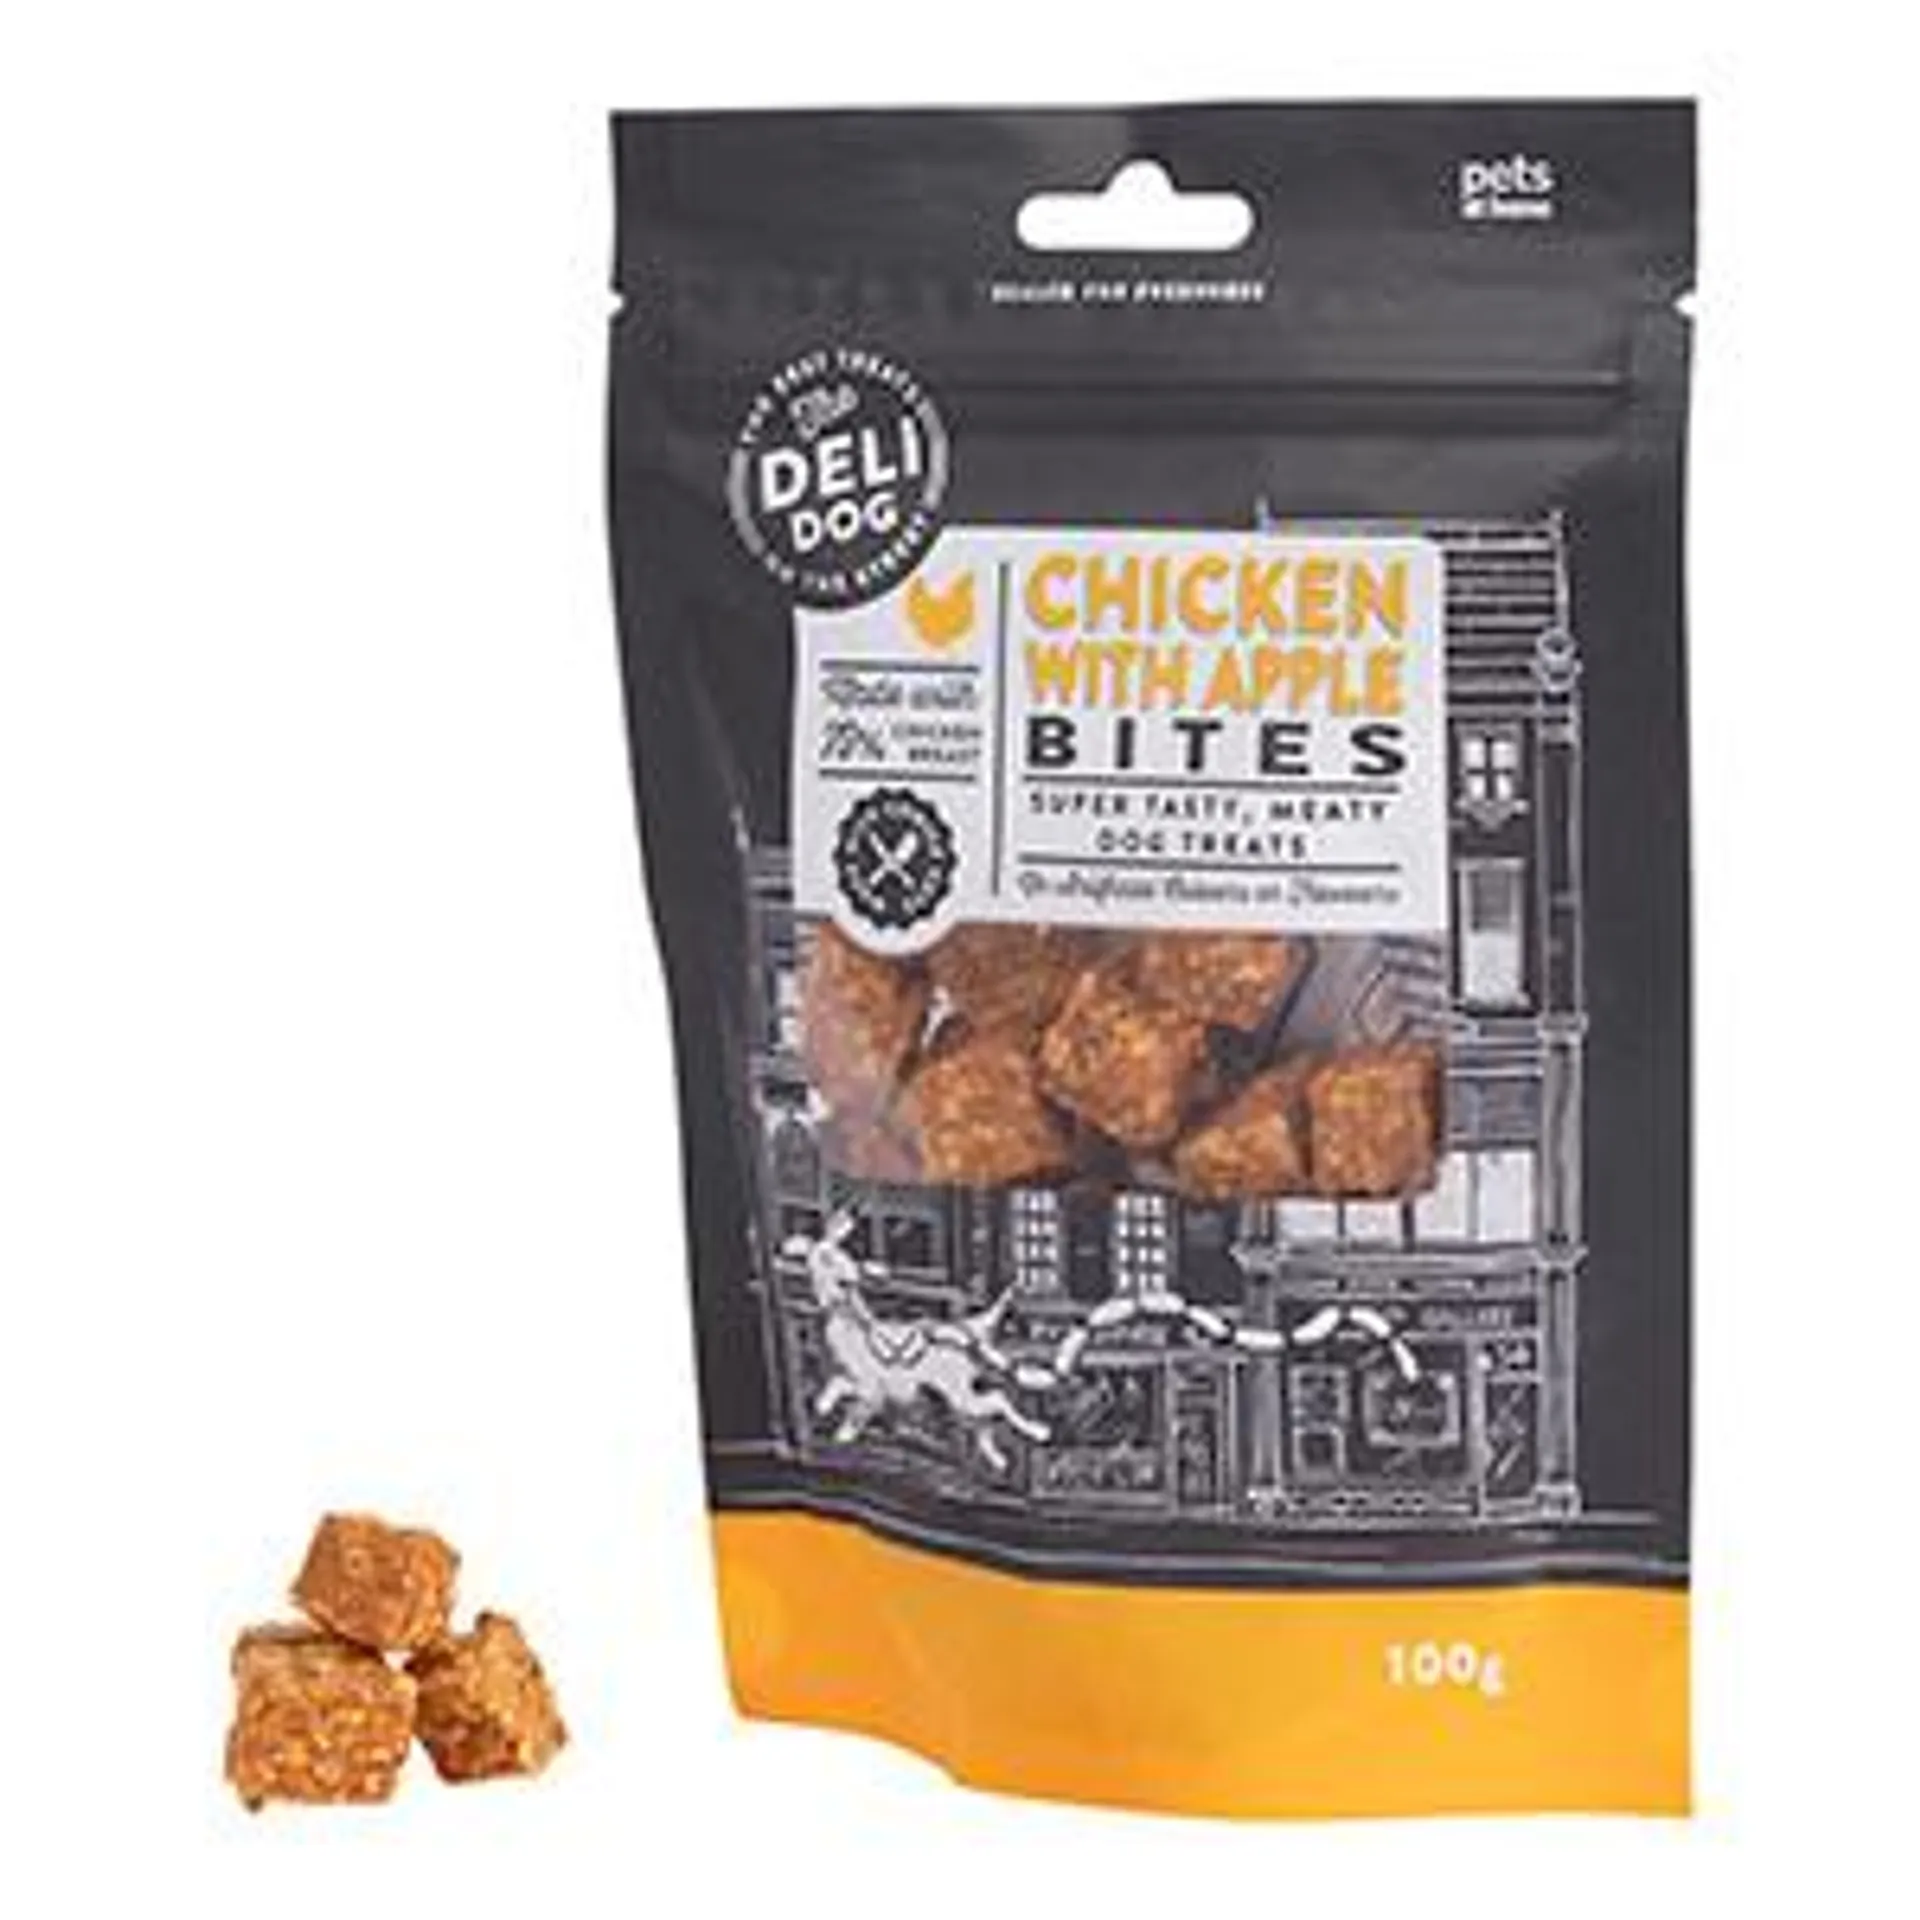 Pets at Home The Deli Dog Chicken Bites with Apple Adult Dog Treats 100g